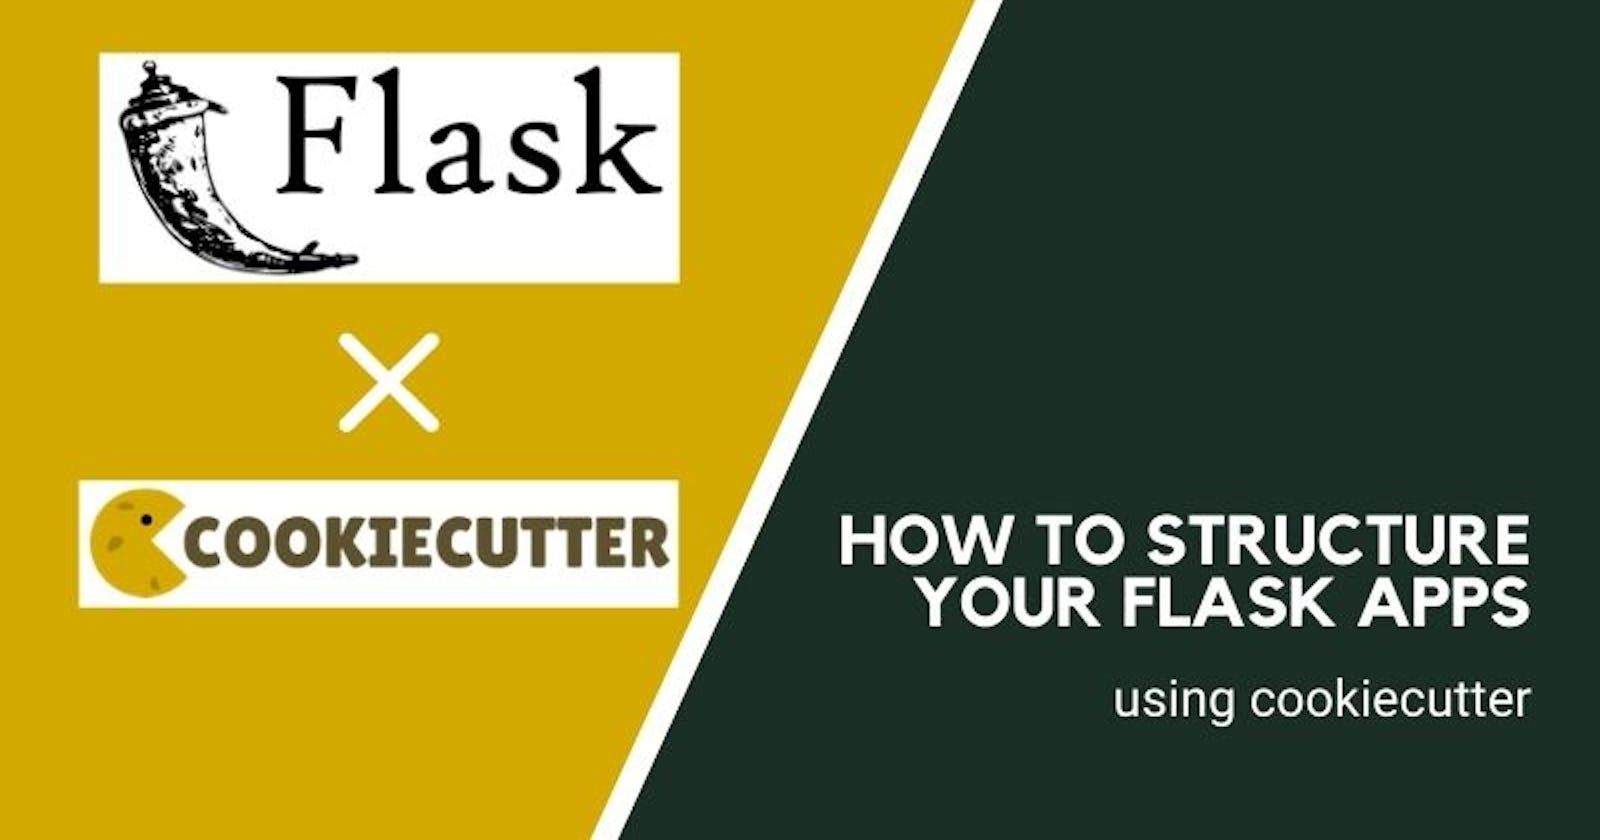 How to structure your Flask apps using cookiecutter